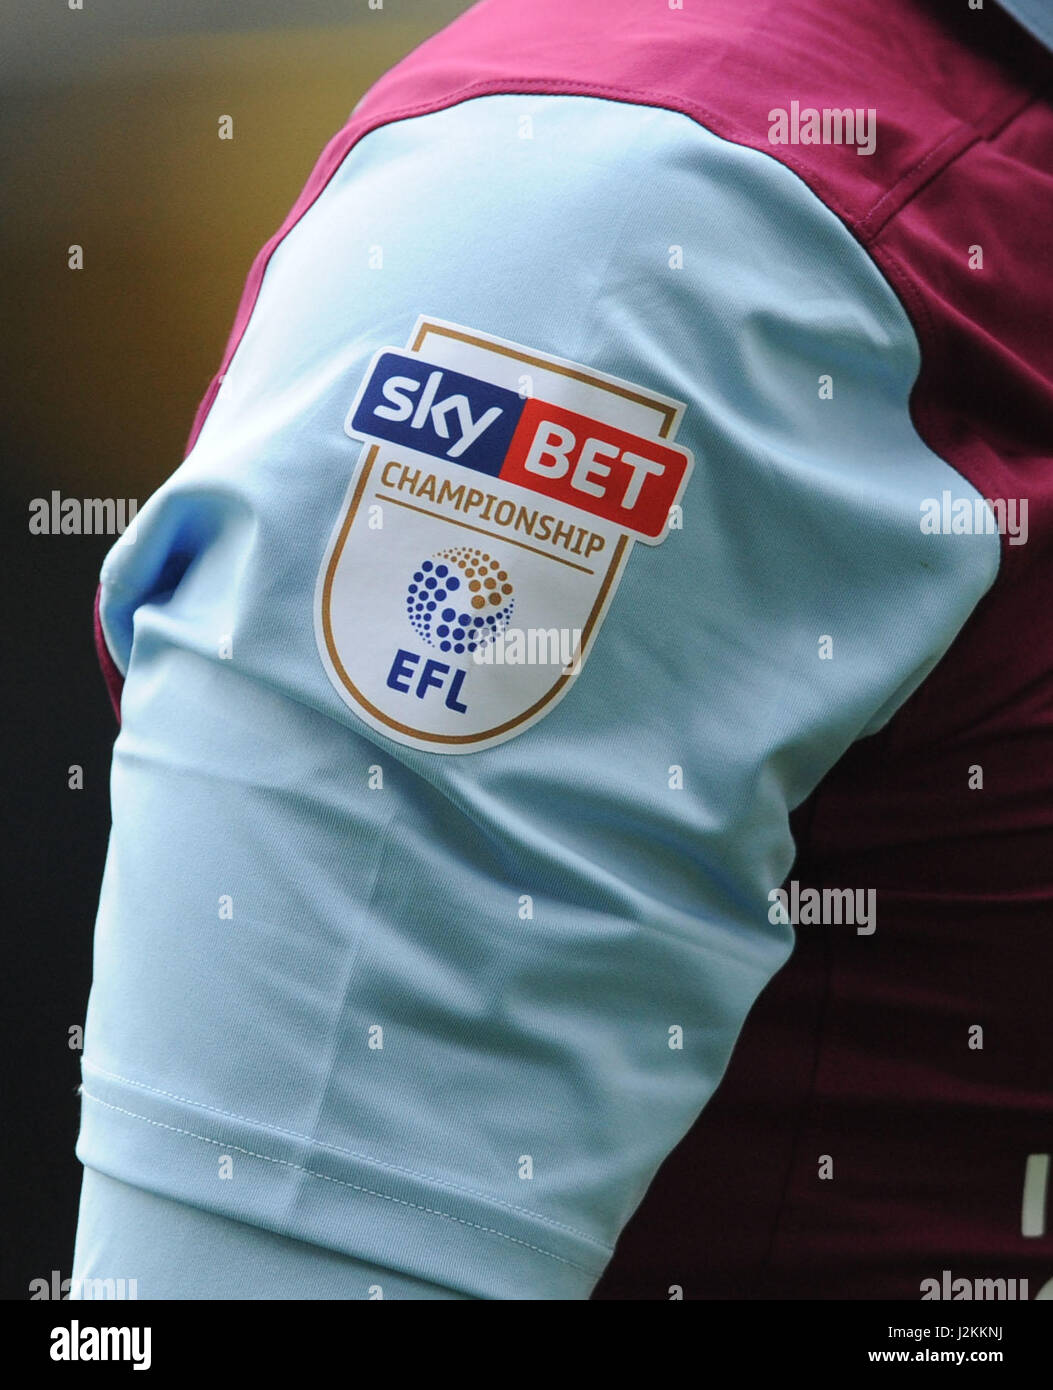 A view of an EFL badge during the Sky Bet Championship match at Ewood Park, Blackburn. PRESS ASSOCIATION Photo. Picture date: Saturday April 29, 2017. See PA story SOCCER Blackburn. Photo credit should read: Rui Vieira/PA Wire. RESTRICTIONS: No use with unauthorised audio, video, data, fixture lists, club/league logos or 'live' services. Online in-match use limited to 75 images, no video emulation. No use in betting, games or single club/league/player publications. Stock Photo